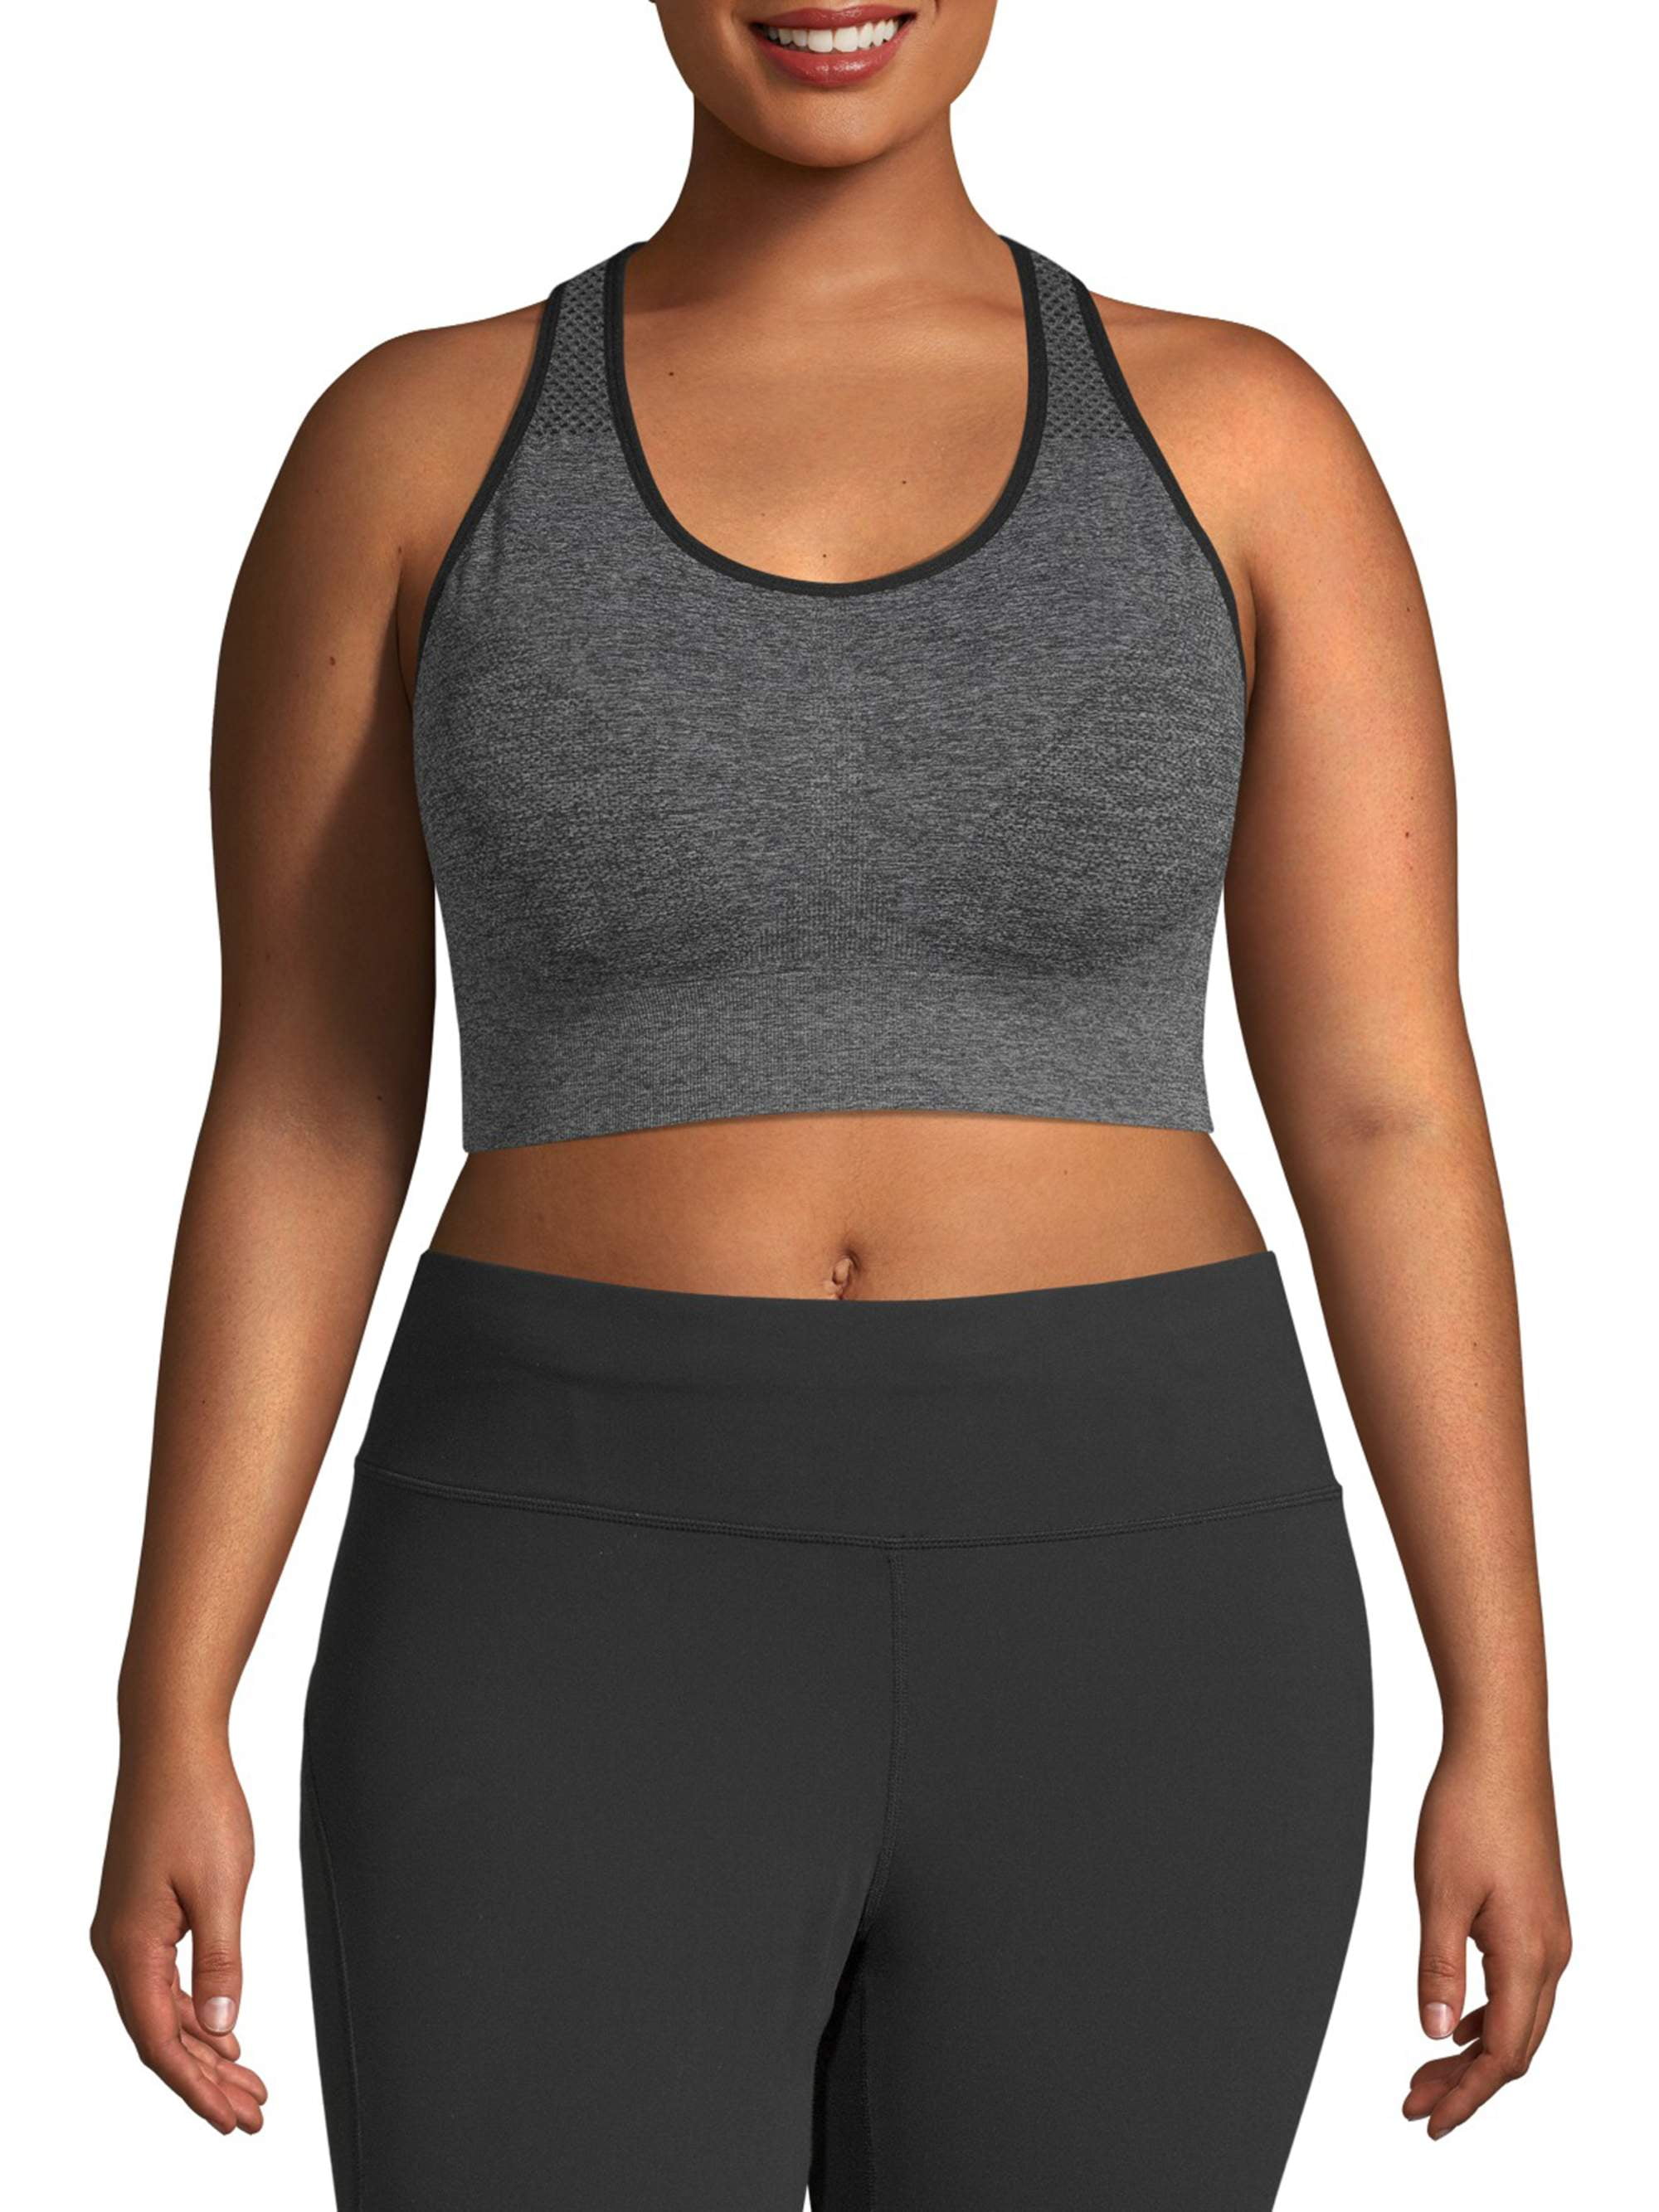 Under Control Plus Size Sports Bras for Women High Support